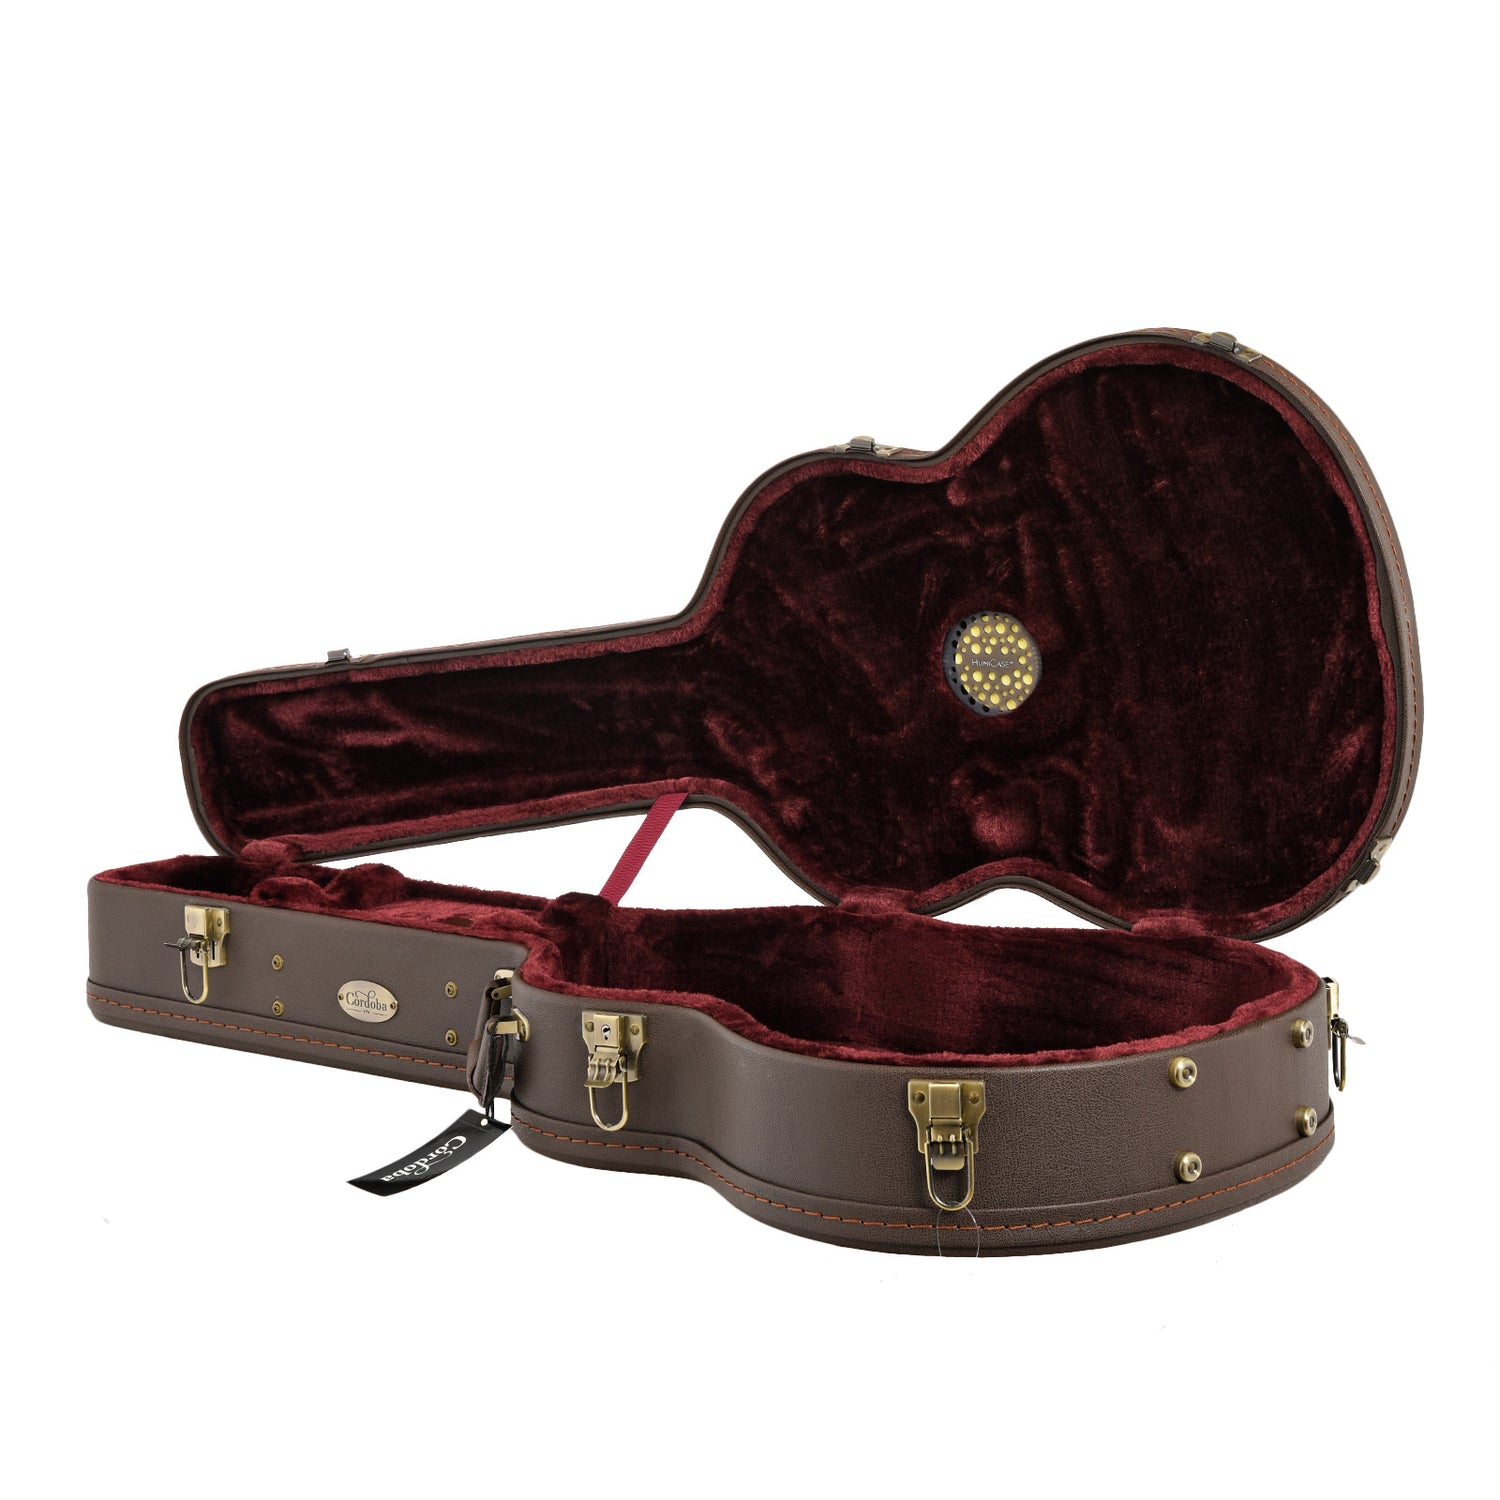 Image 2 of Humicase Protege Classical/Flamenco Guitar Case, Brown - SKU# HCP-BR : Product Type Accessories & Parts : Elderly Instruments